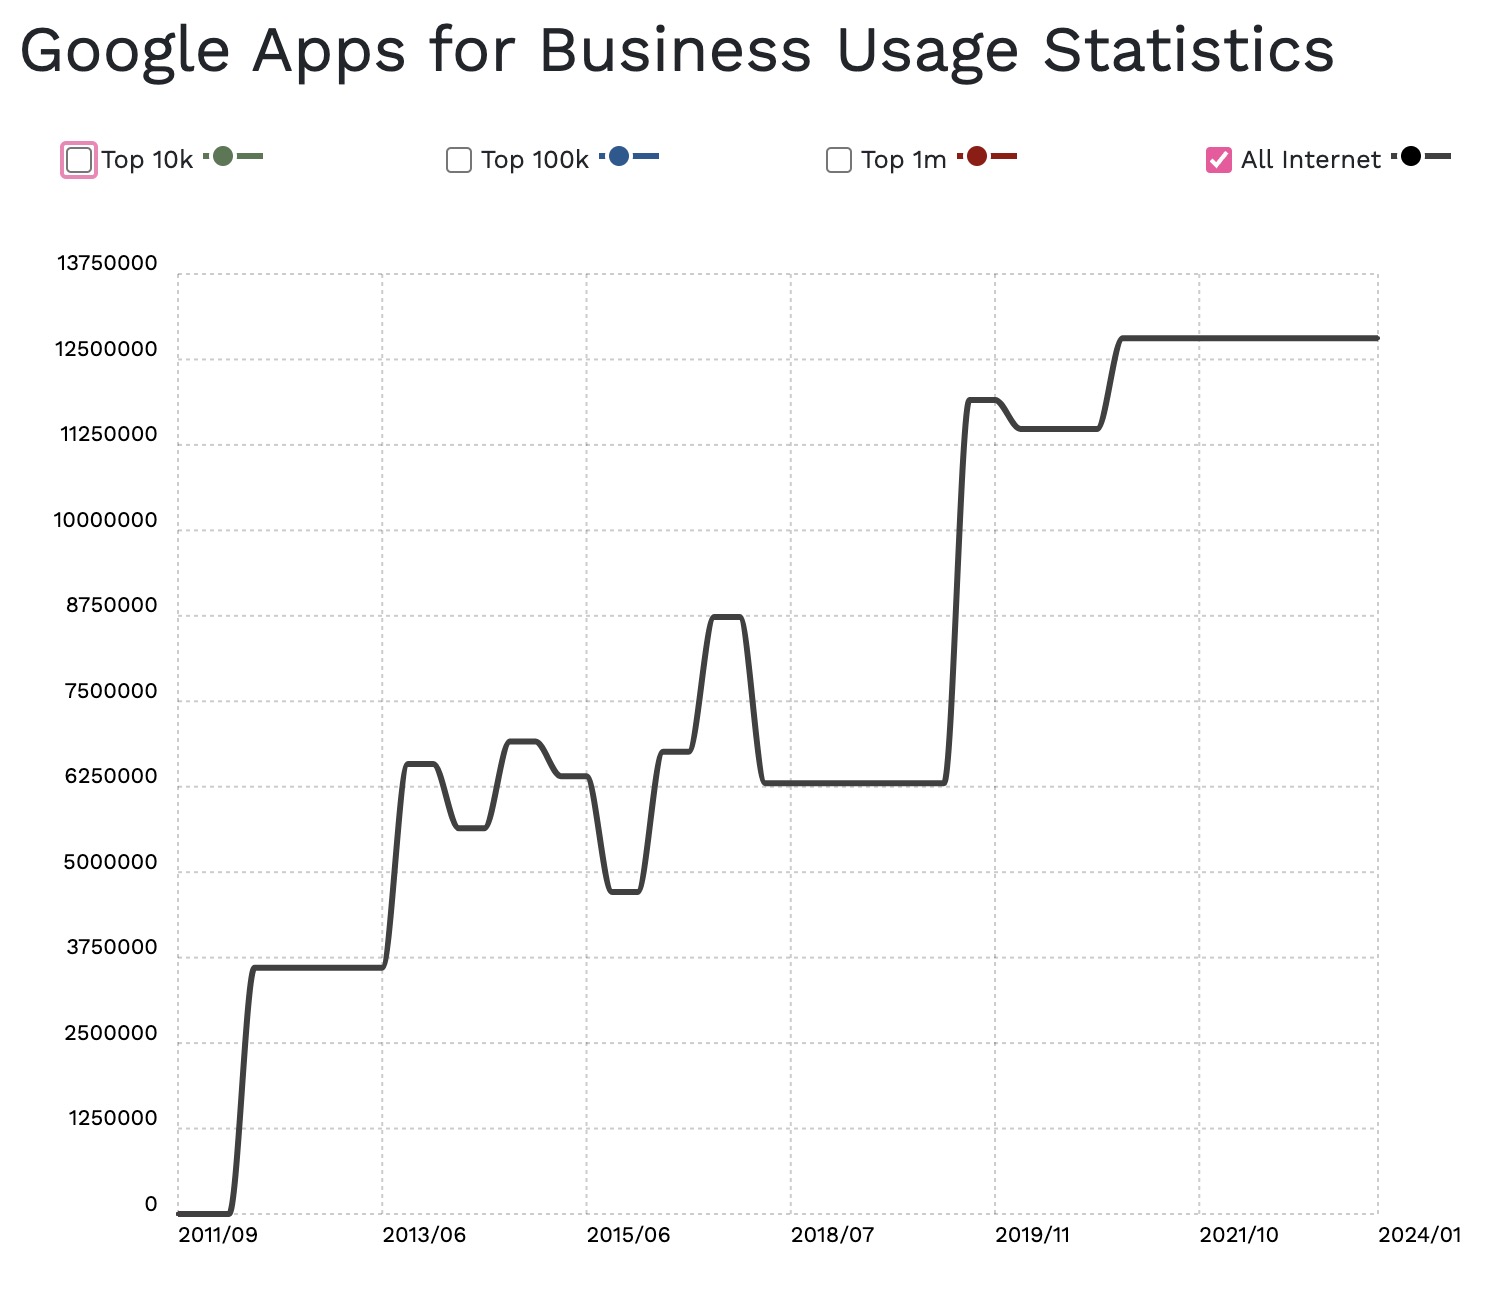 A line graph showing Google Apps for Business usage has gone up over the years and remains consistently-high since around 2020